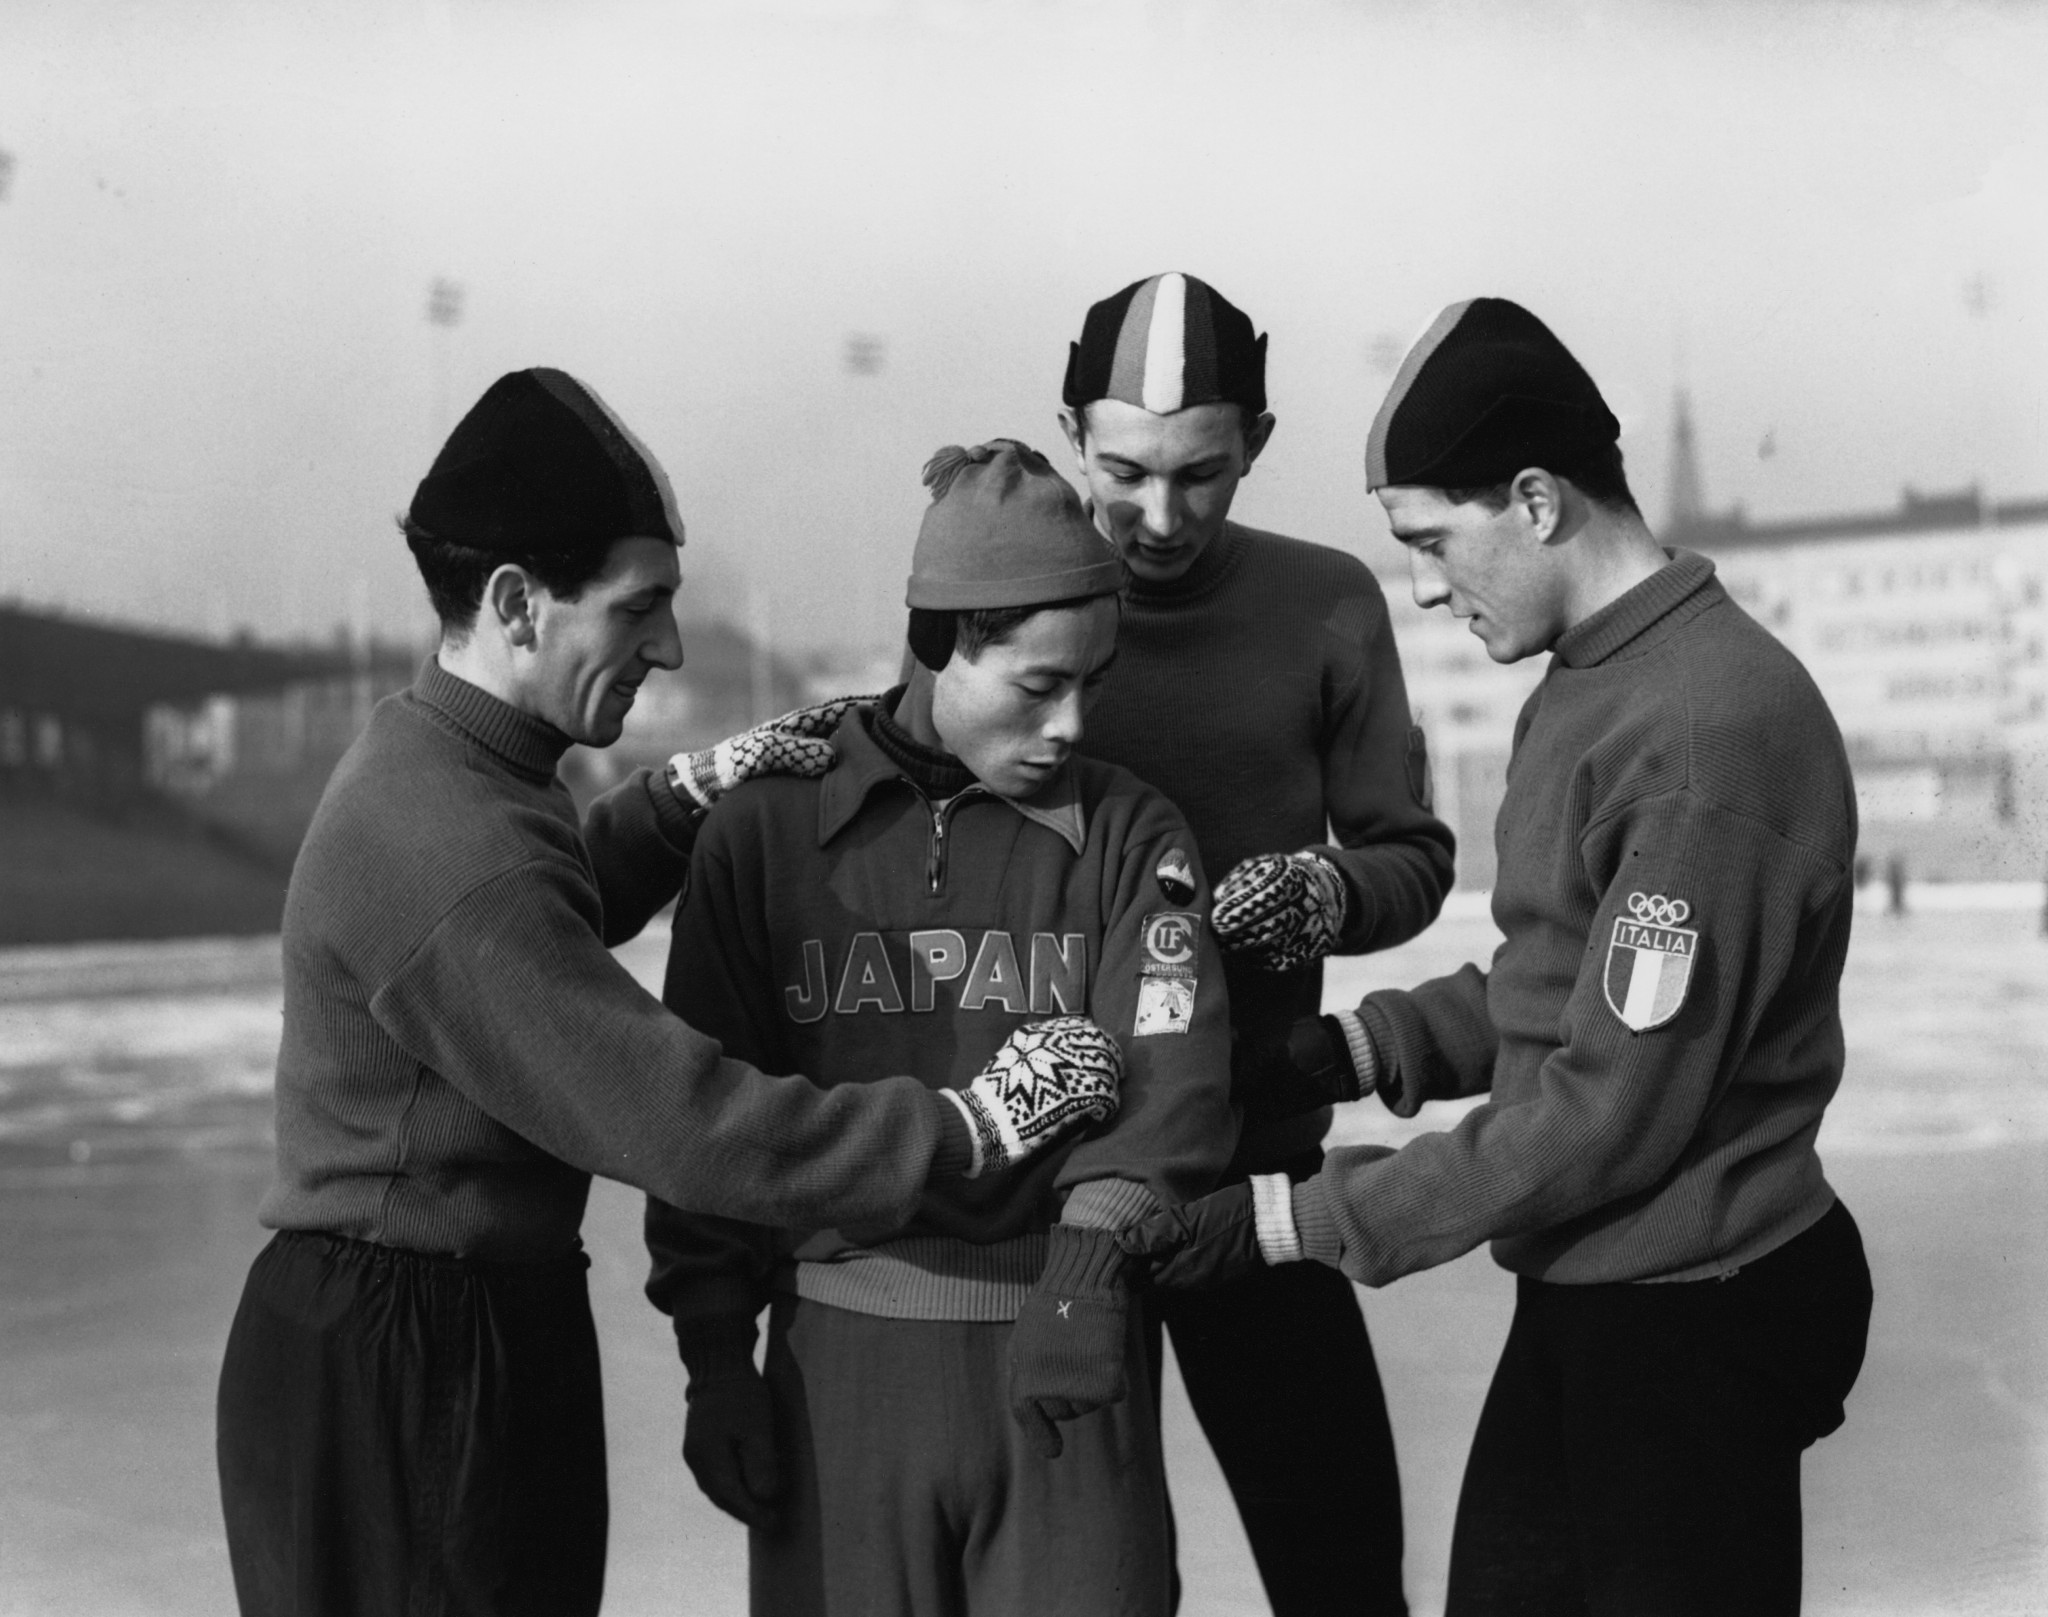 Speed skater Guido Caroli, left, competed at three Winter Olympics - 1948, 1952 and 1956 ©Getty Images